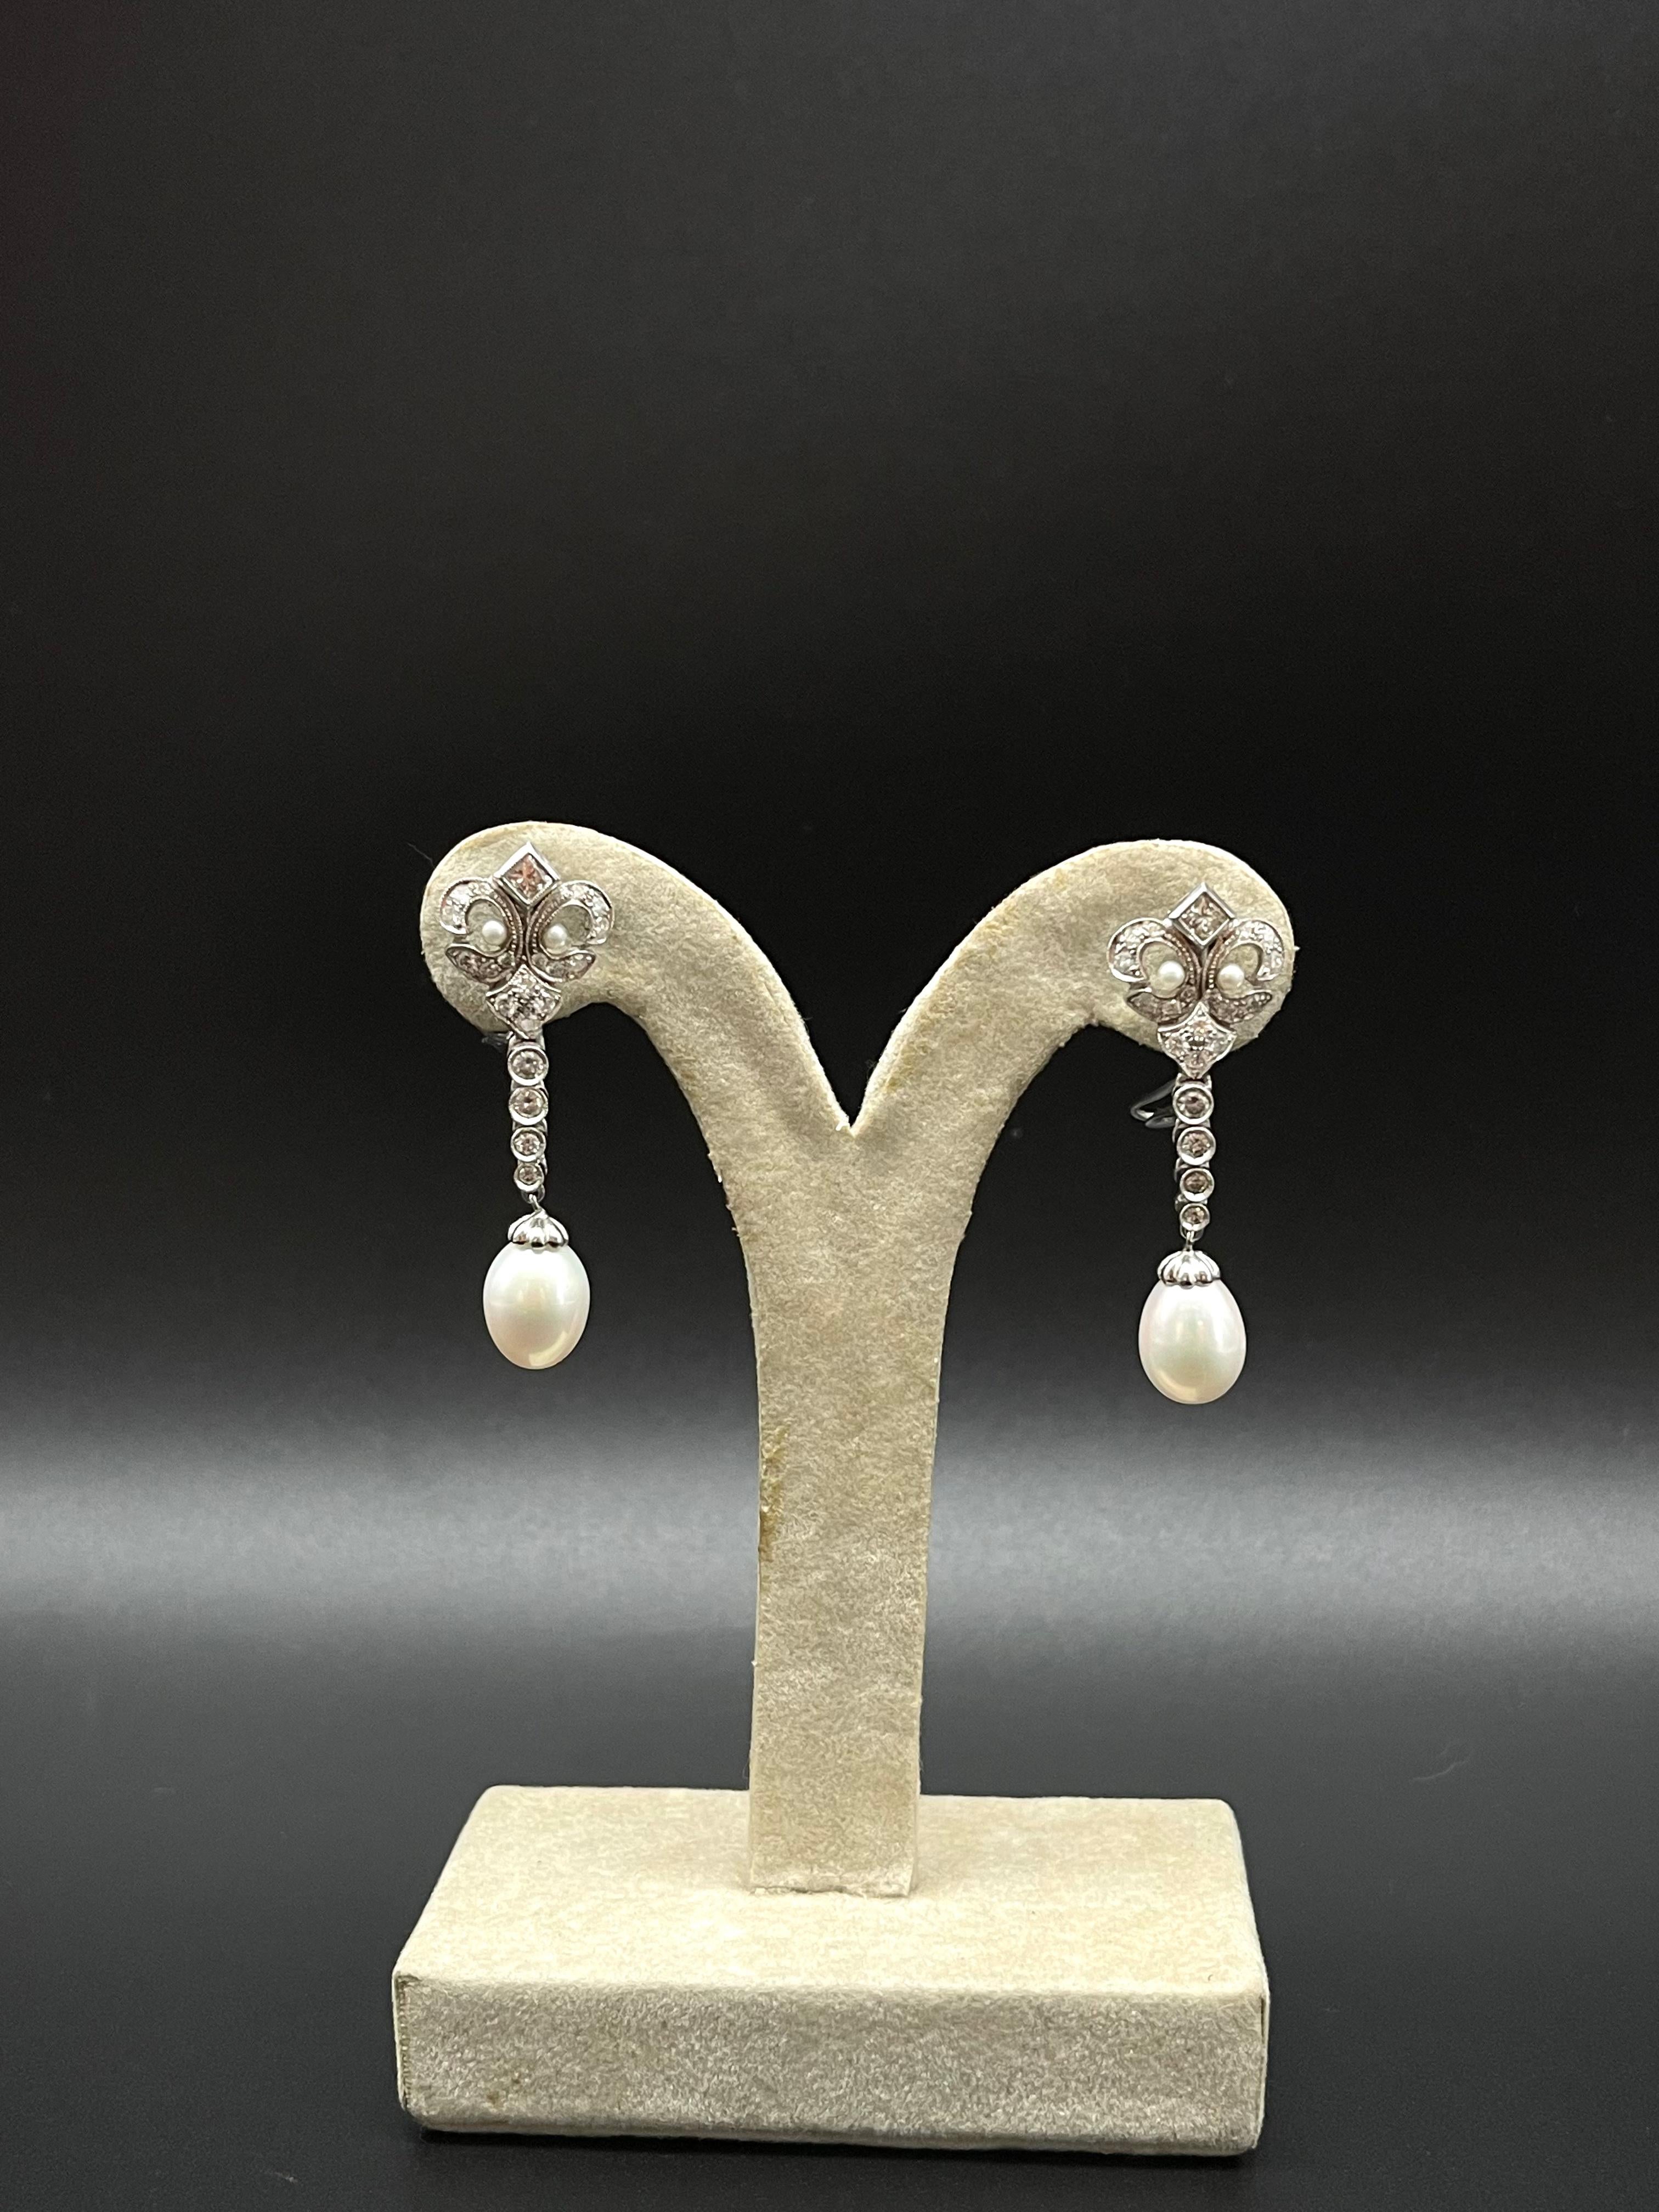 A breathtaking pair of Portuguese White Gold and diamond and seed pearl earrings in the shape of a Royal Fleur-de-Lis with two Pearls as pendants.

Graceful in design, these stunning pearl earrings are crafted in 19.2 Karat Portuguese white gold and